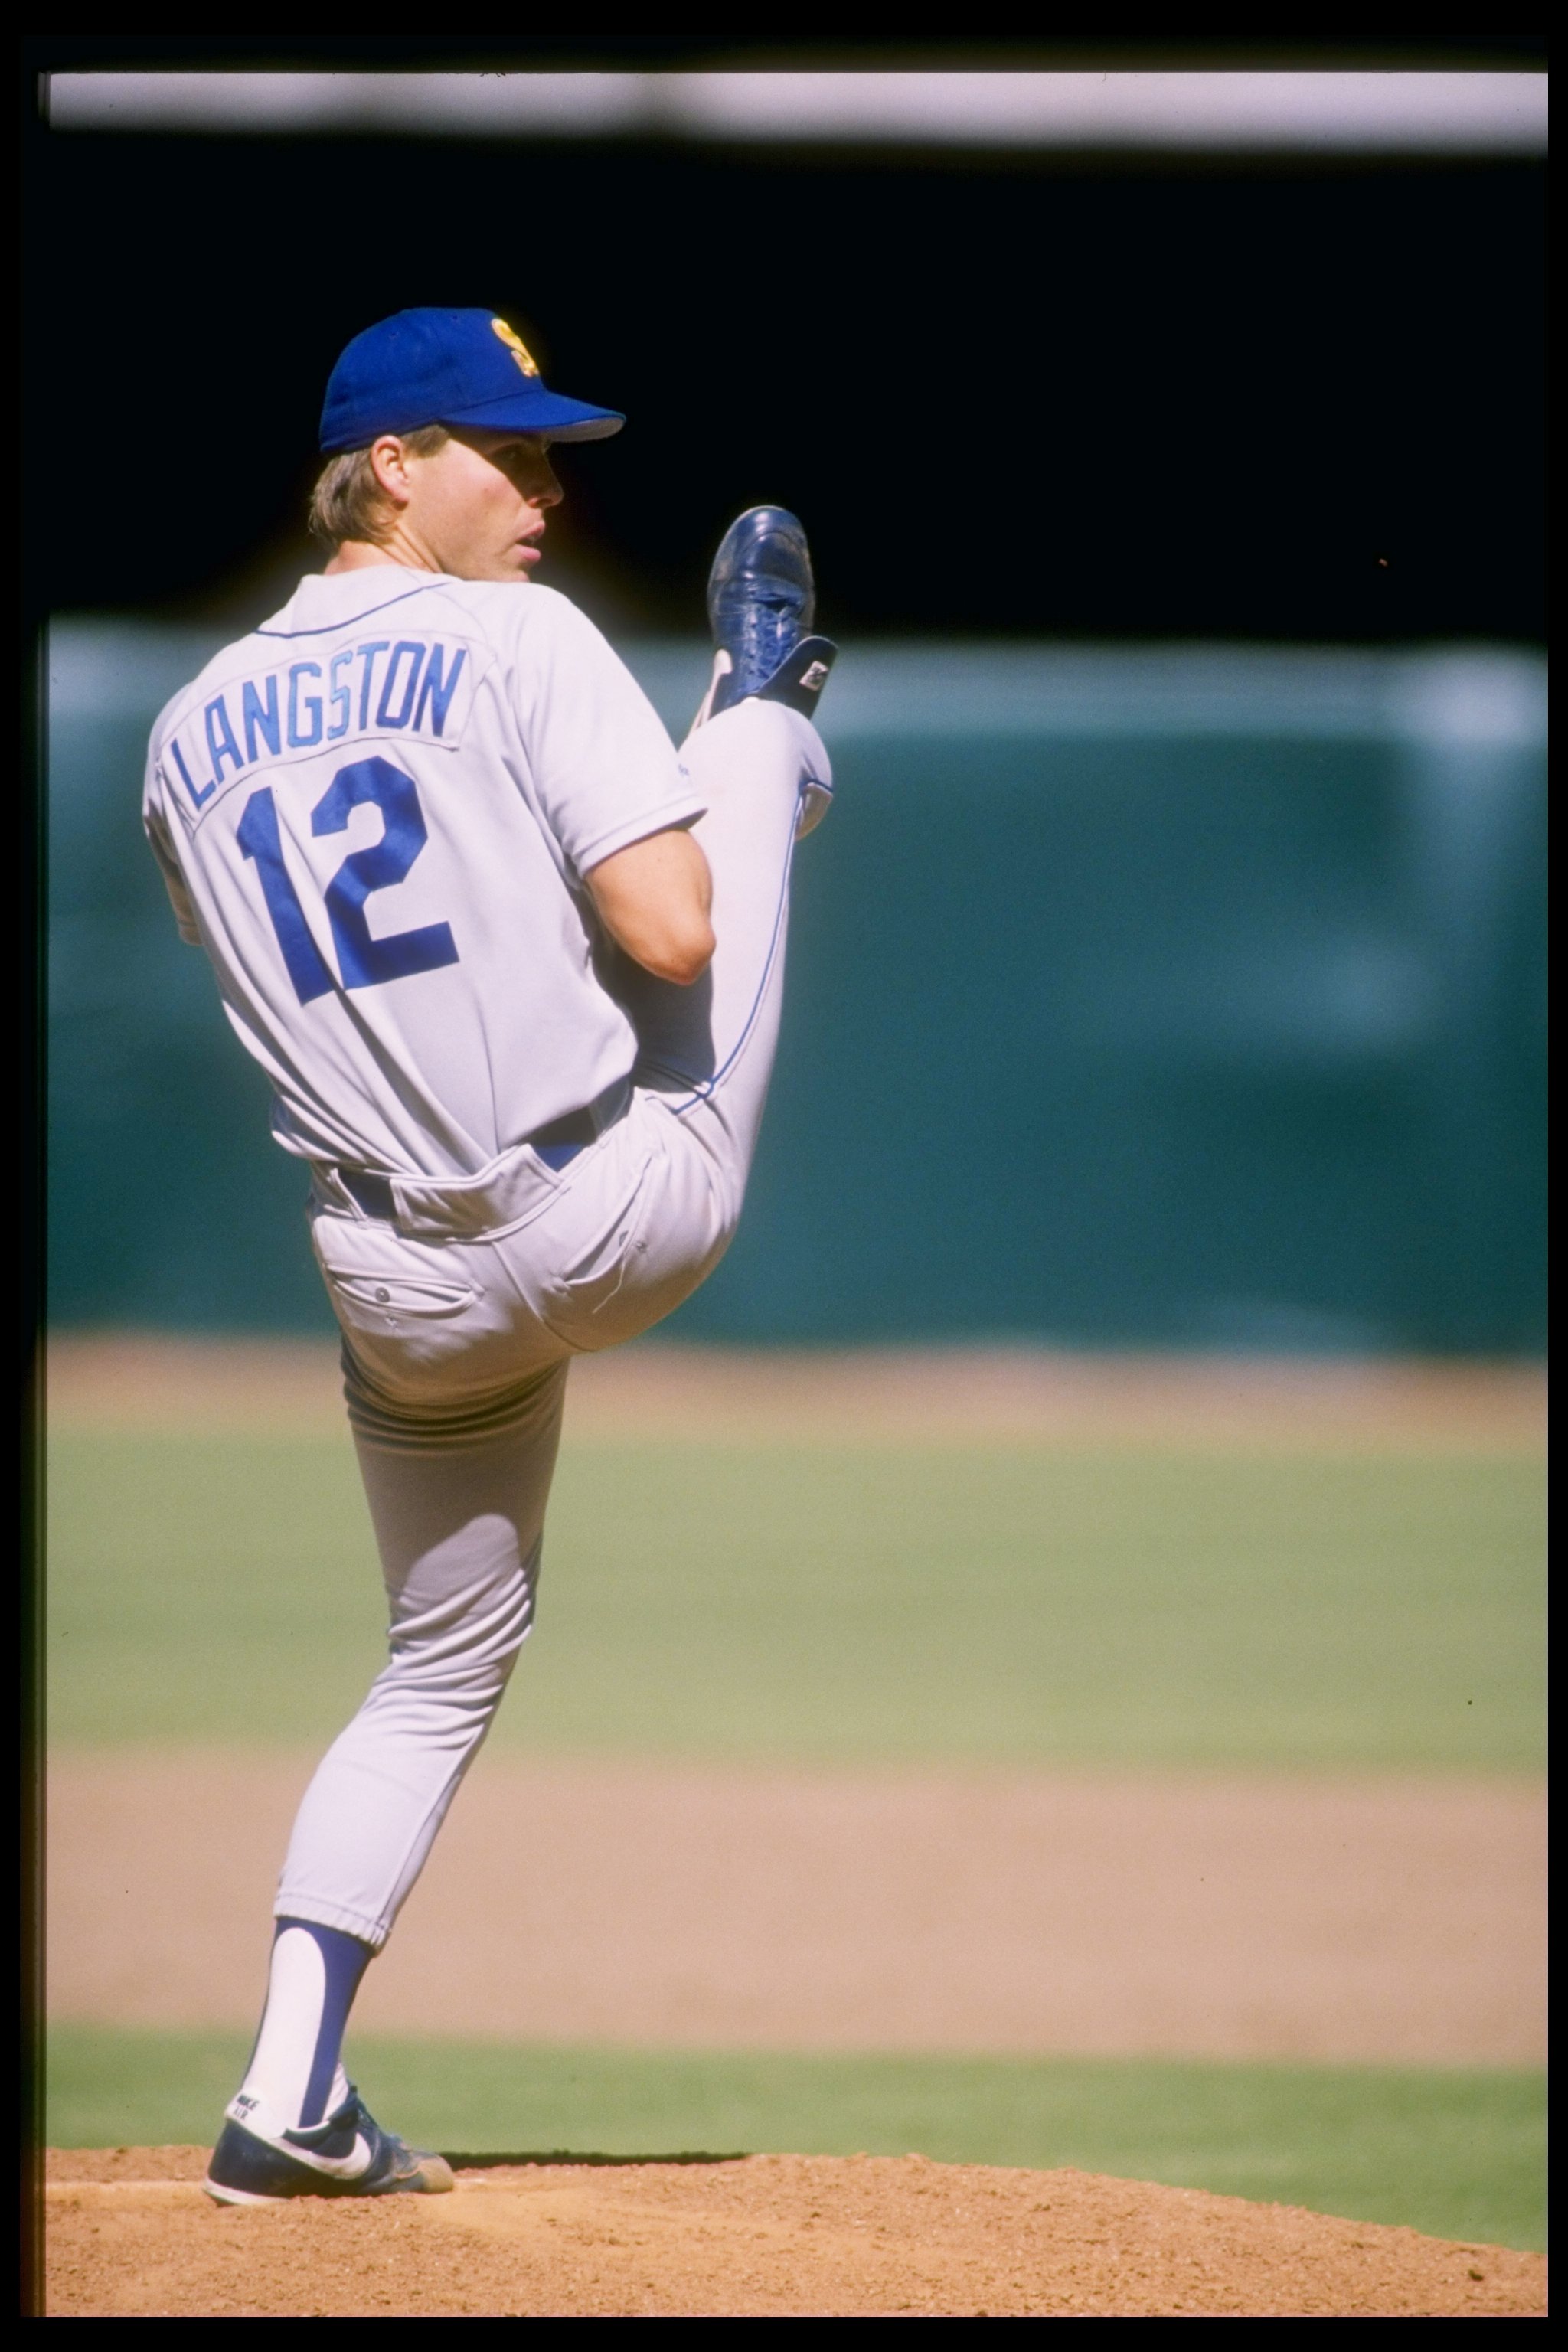 1987:  Pitcher Mark Langston of the Seattle Mariners winds up for the pitch during a game against the California Angels at Anaheim Stadium in Anaheim, California. Mandatory Credit: Rick Stewart  /Allsport